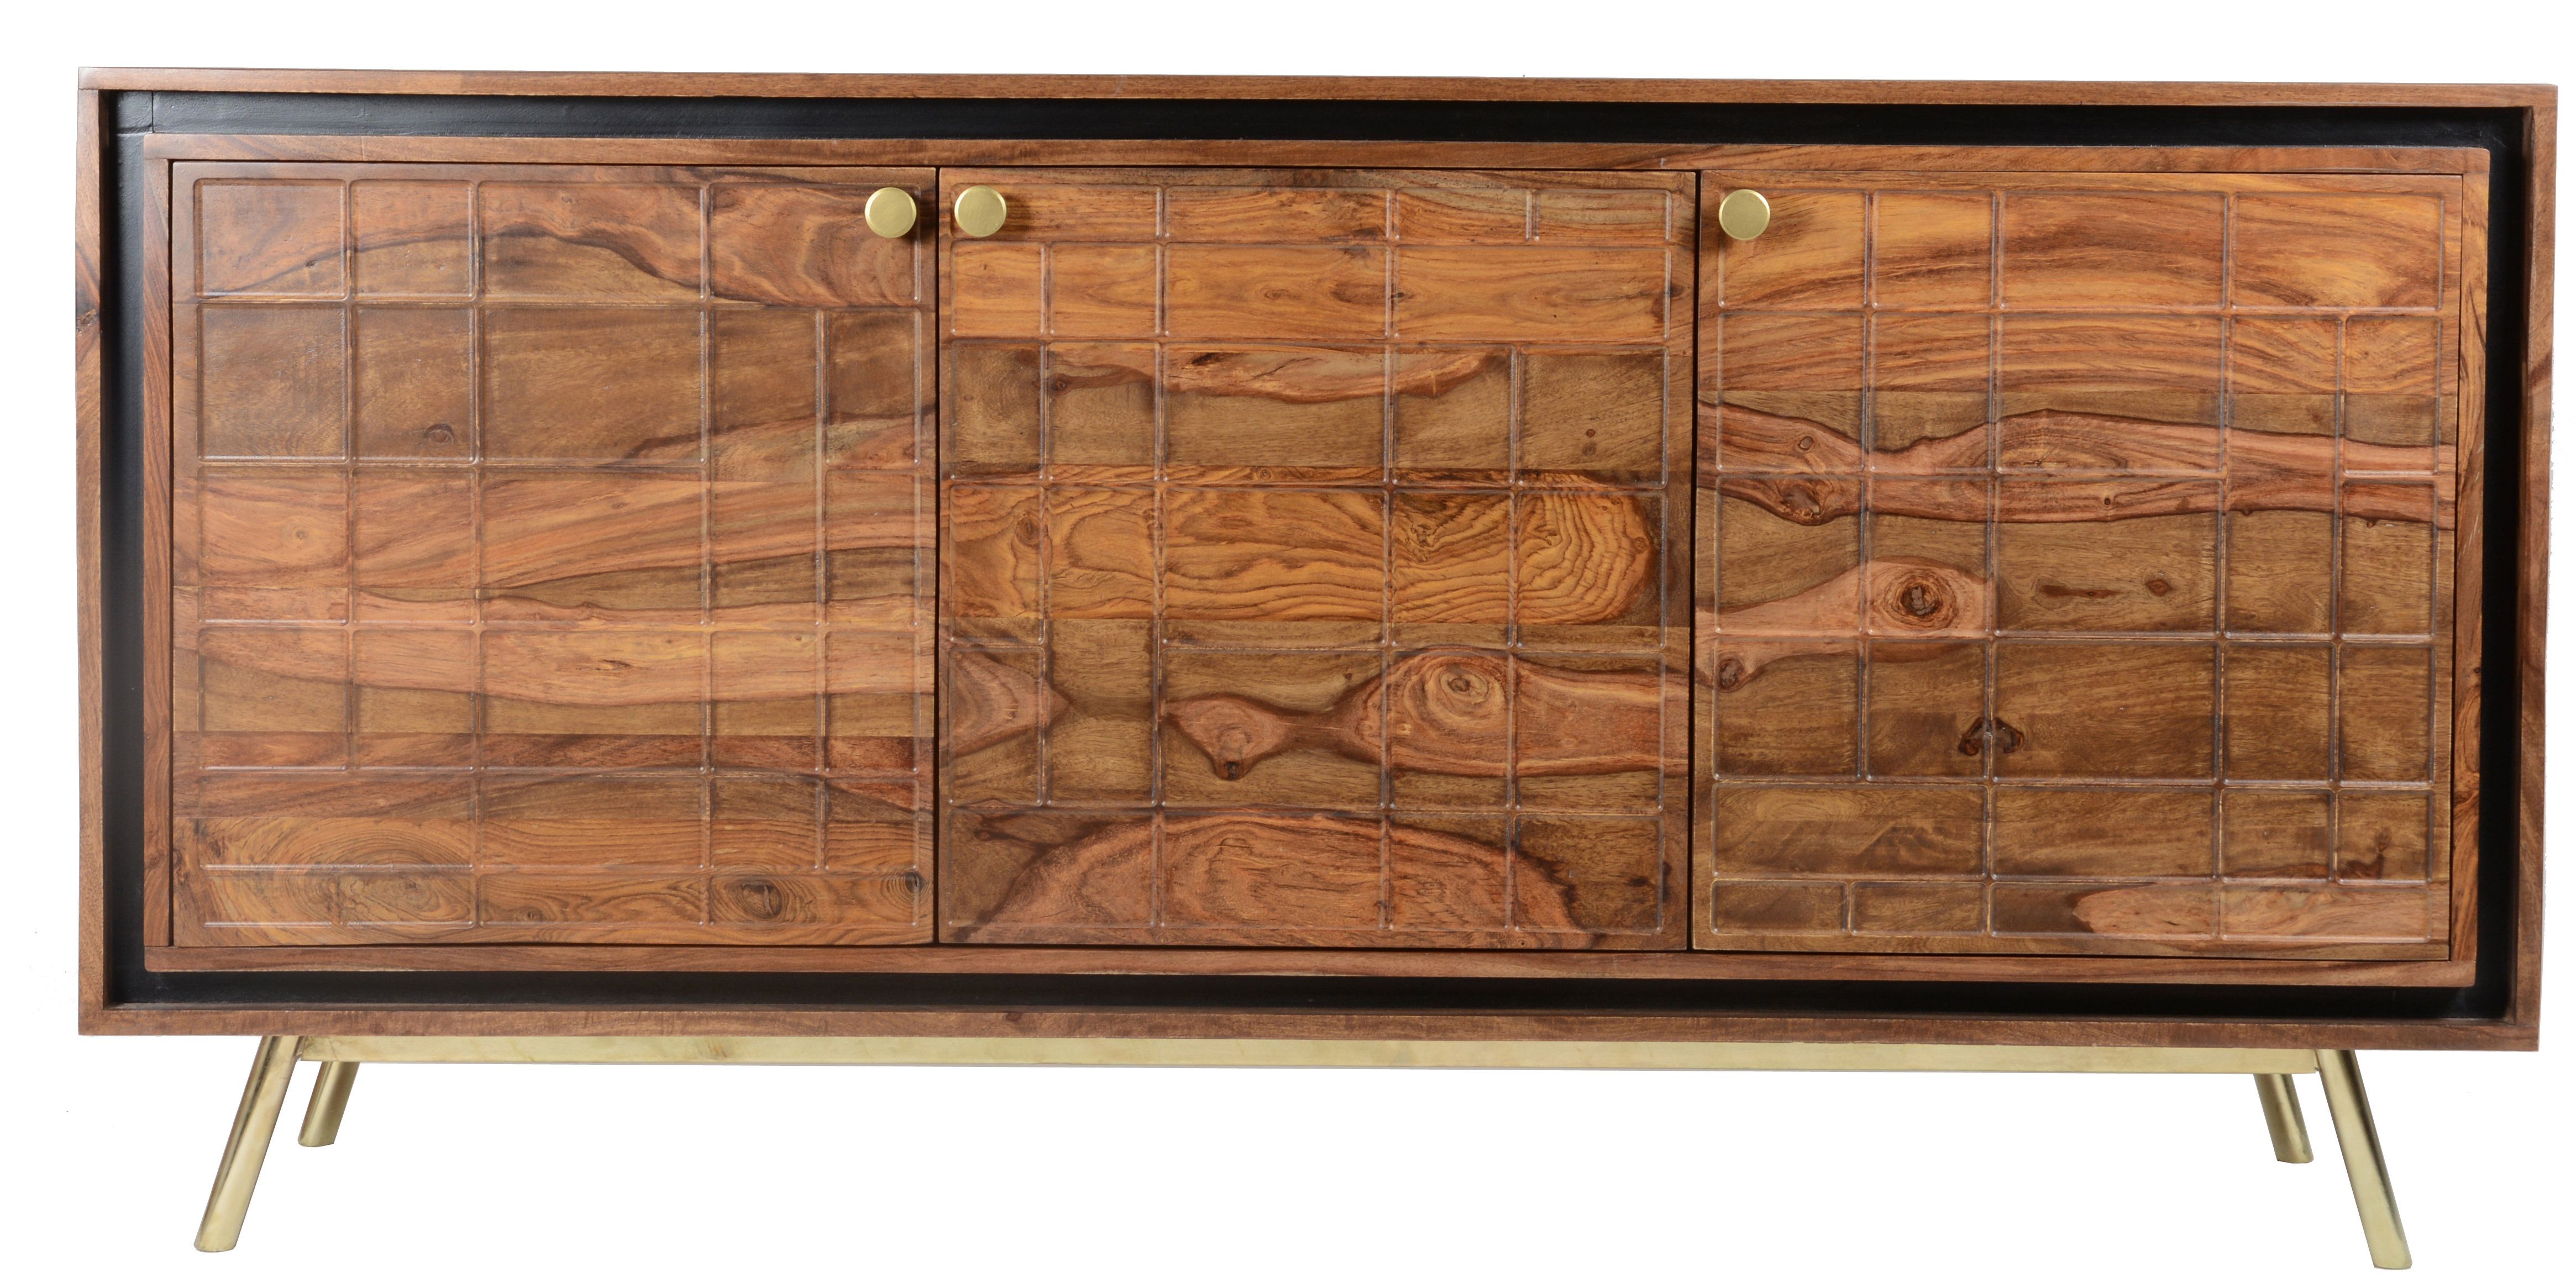 Extra Long Sideboard | Wayfair Throughout Current Arminta Wood Sideboards (Photo 13 of 20)